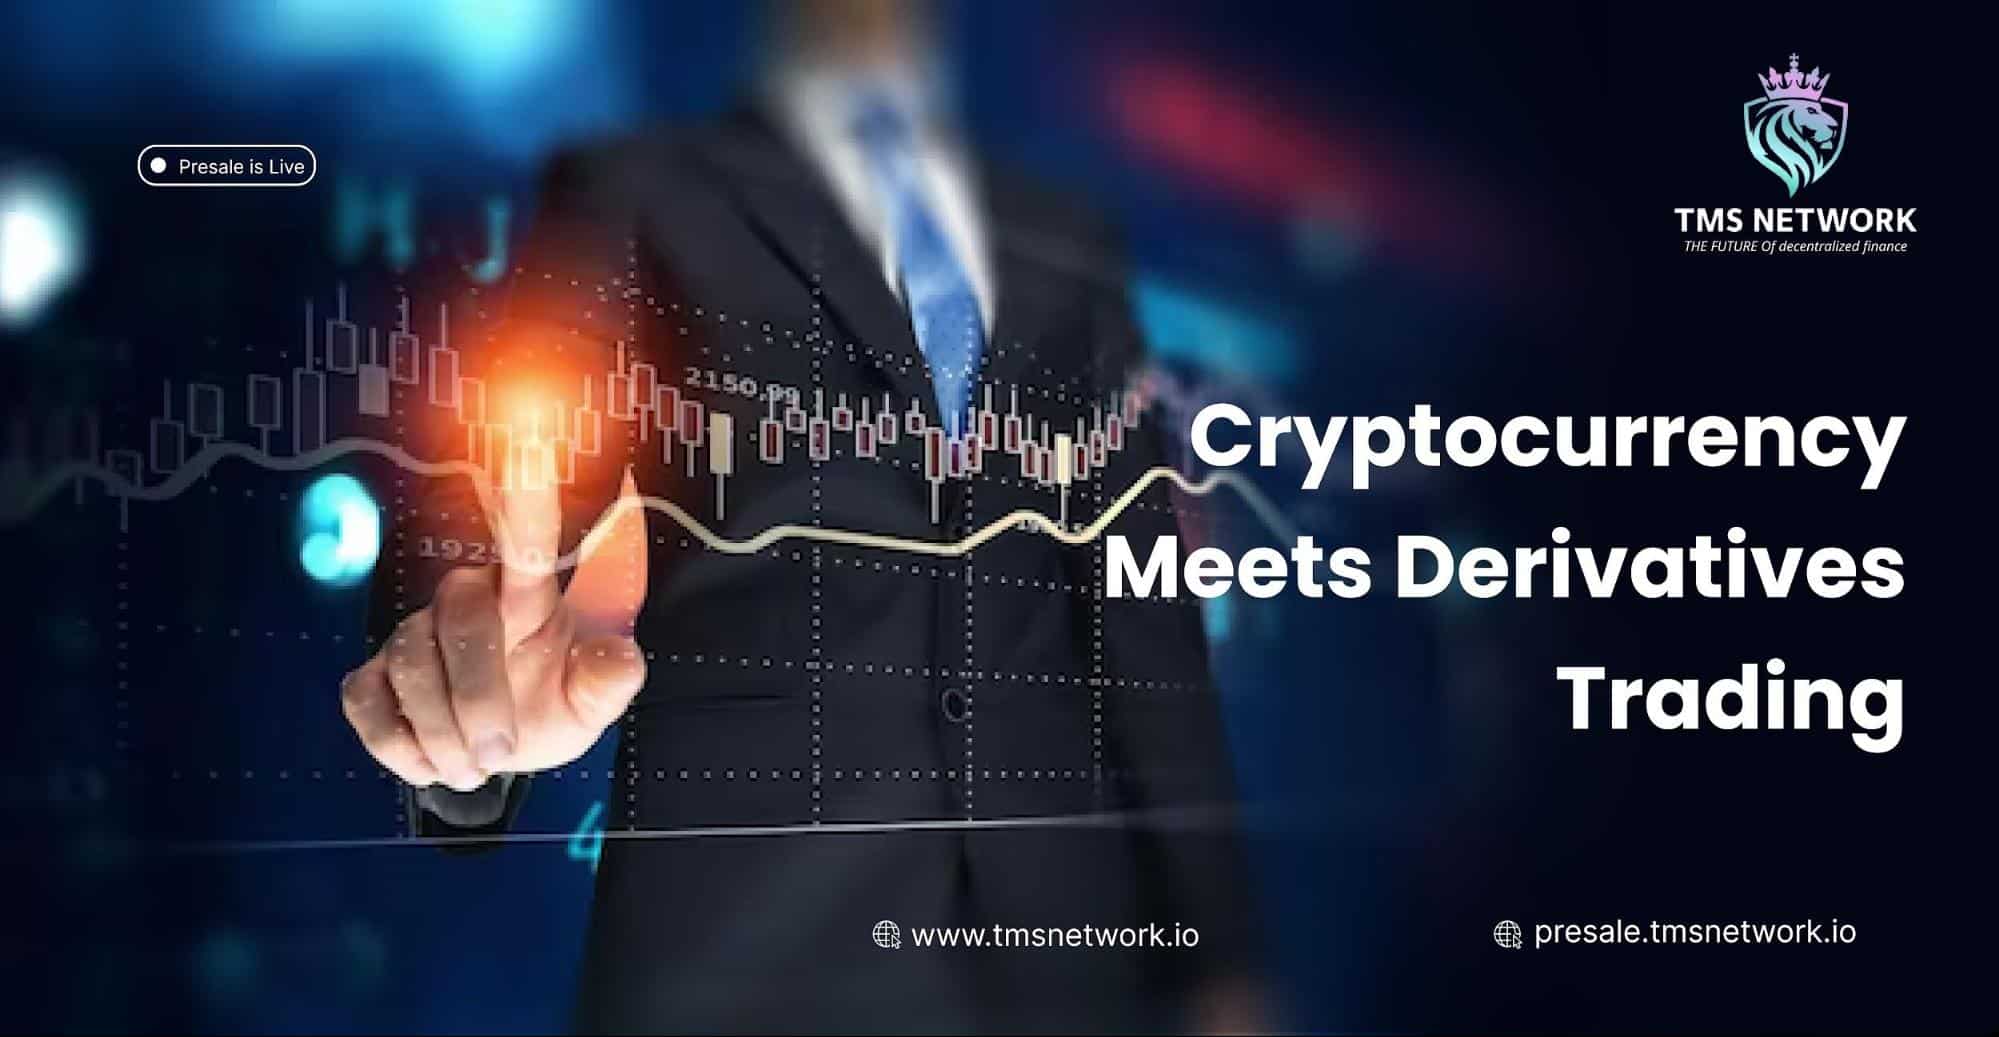 Update, Optimism (OP) Sinks After Airdrop, And The TMS Network (TMSN) Presale Dazzles Investors